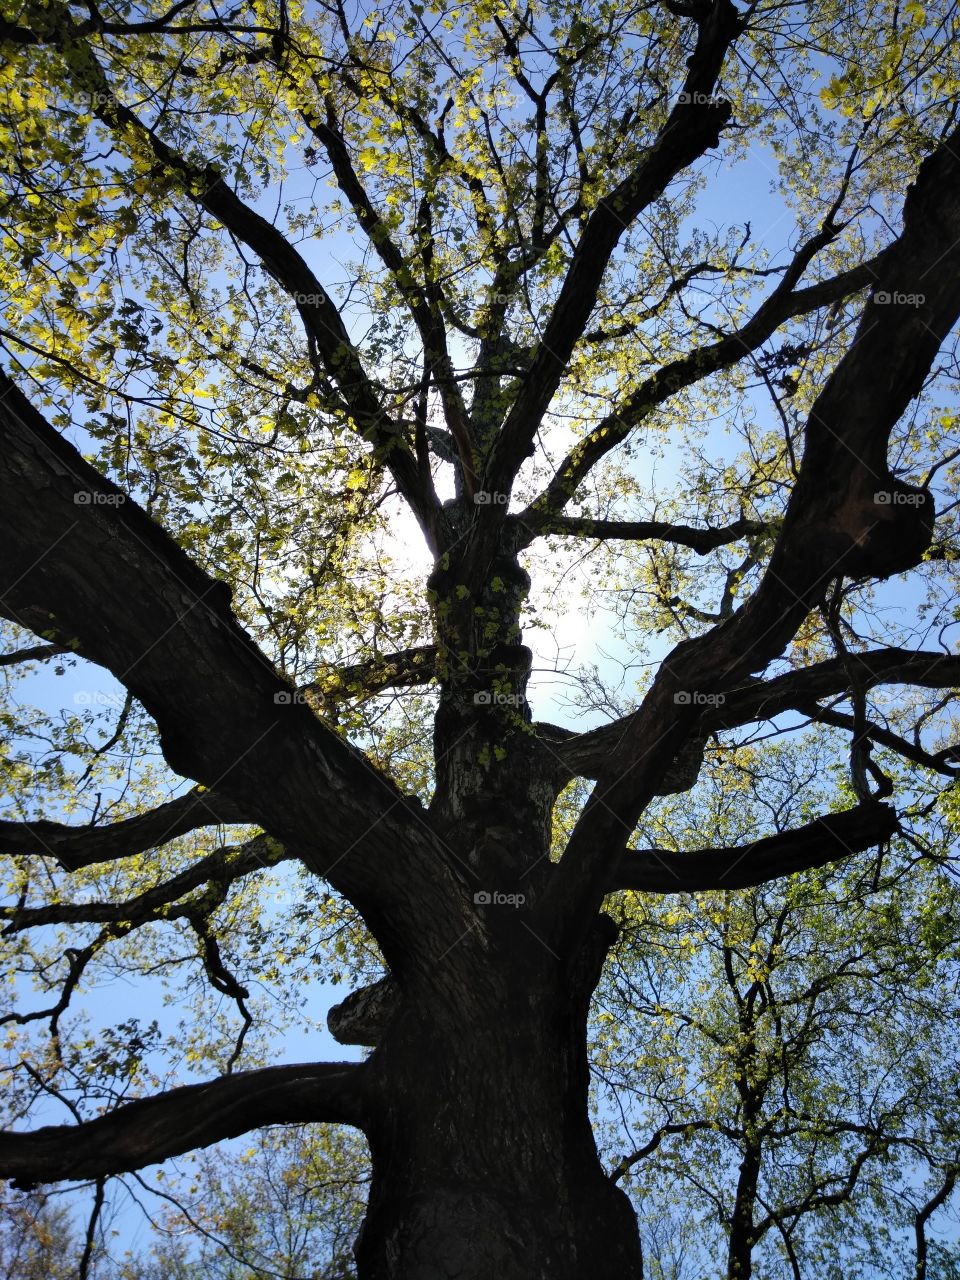 Ancient oak tree with morning sunshine, SkyView.